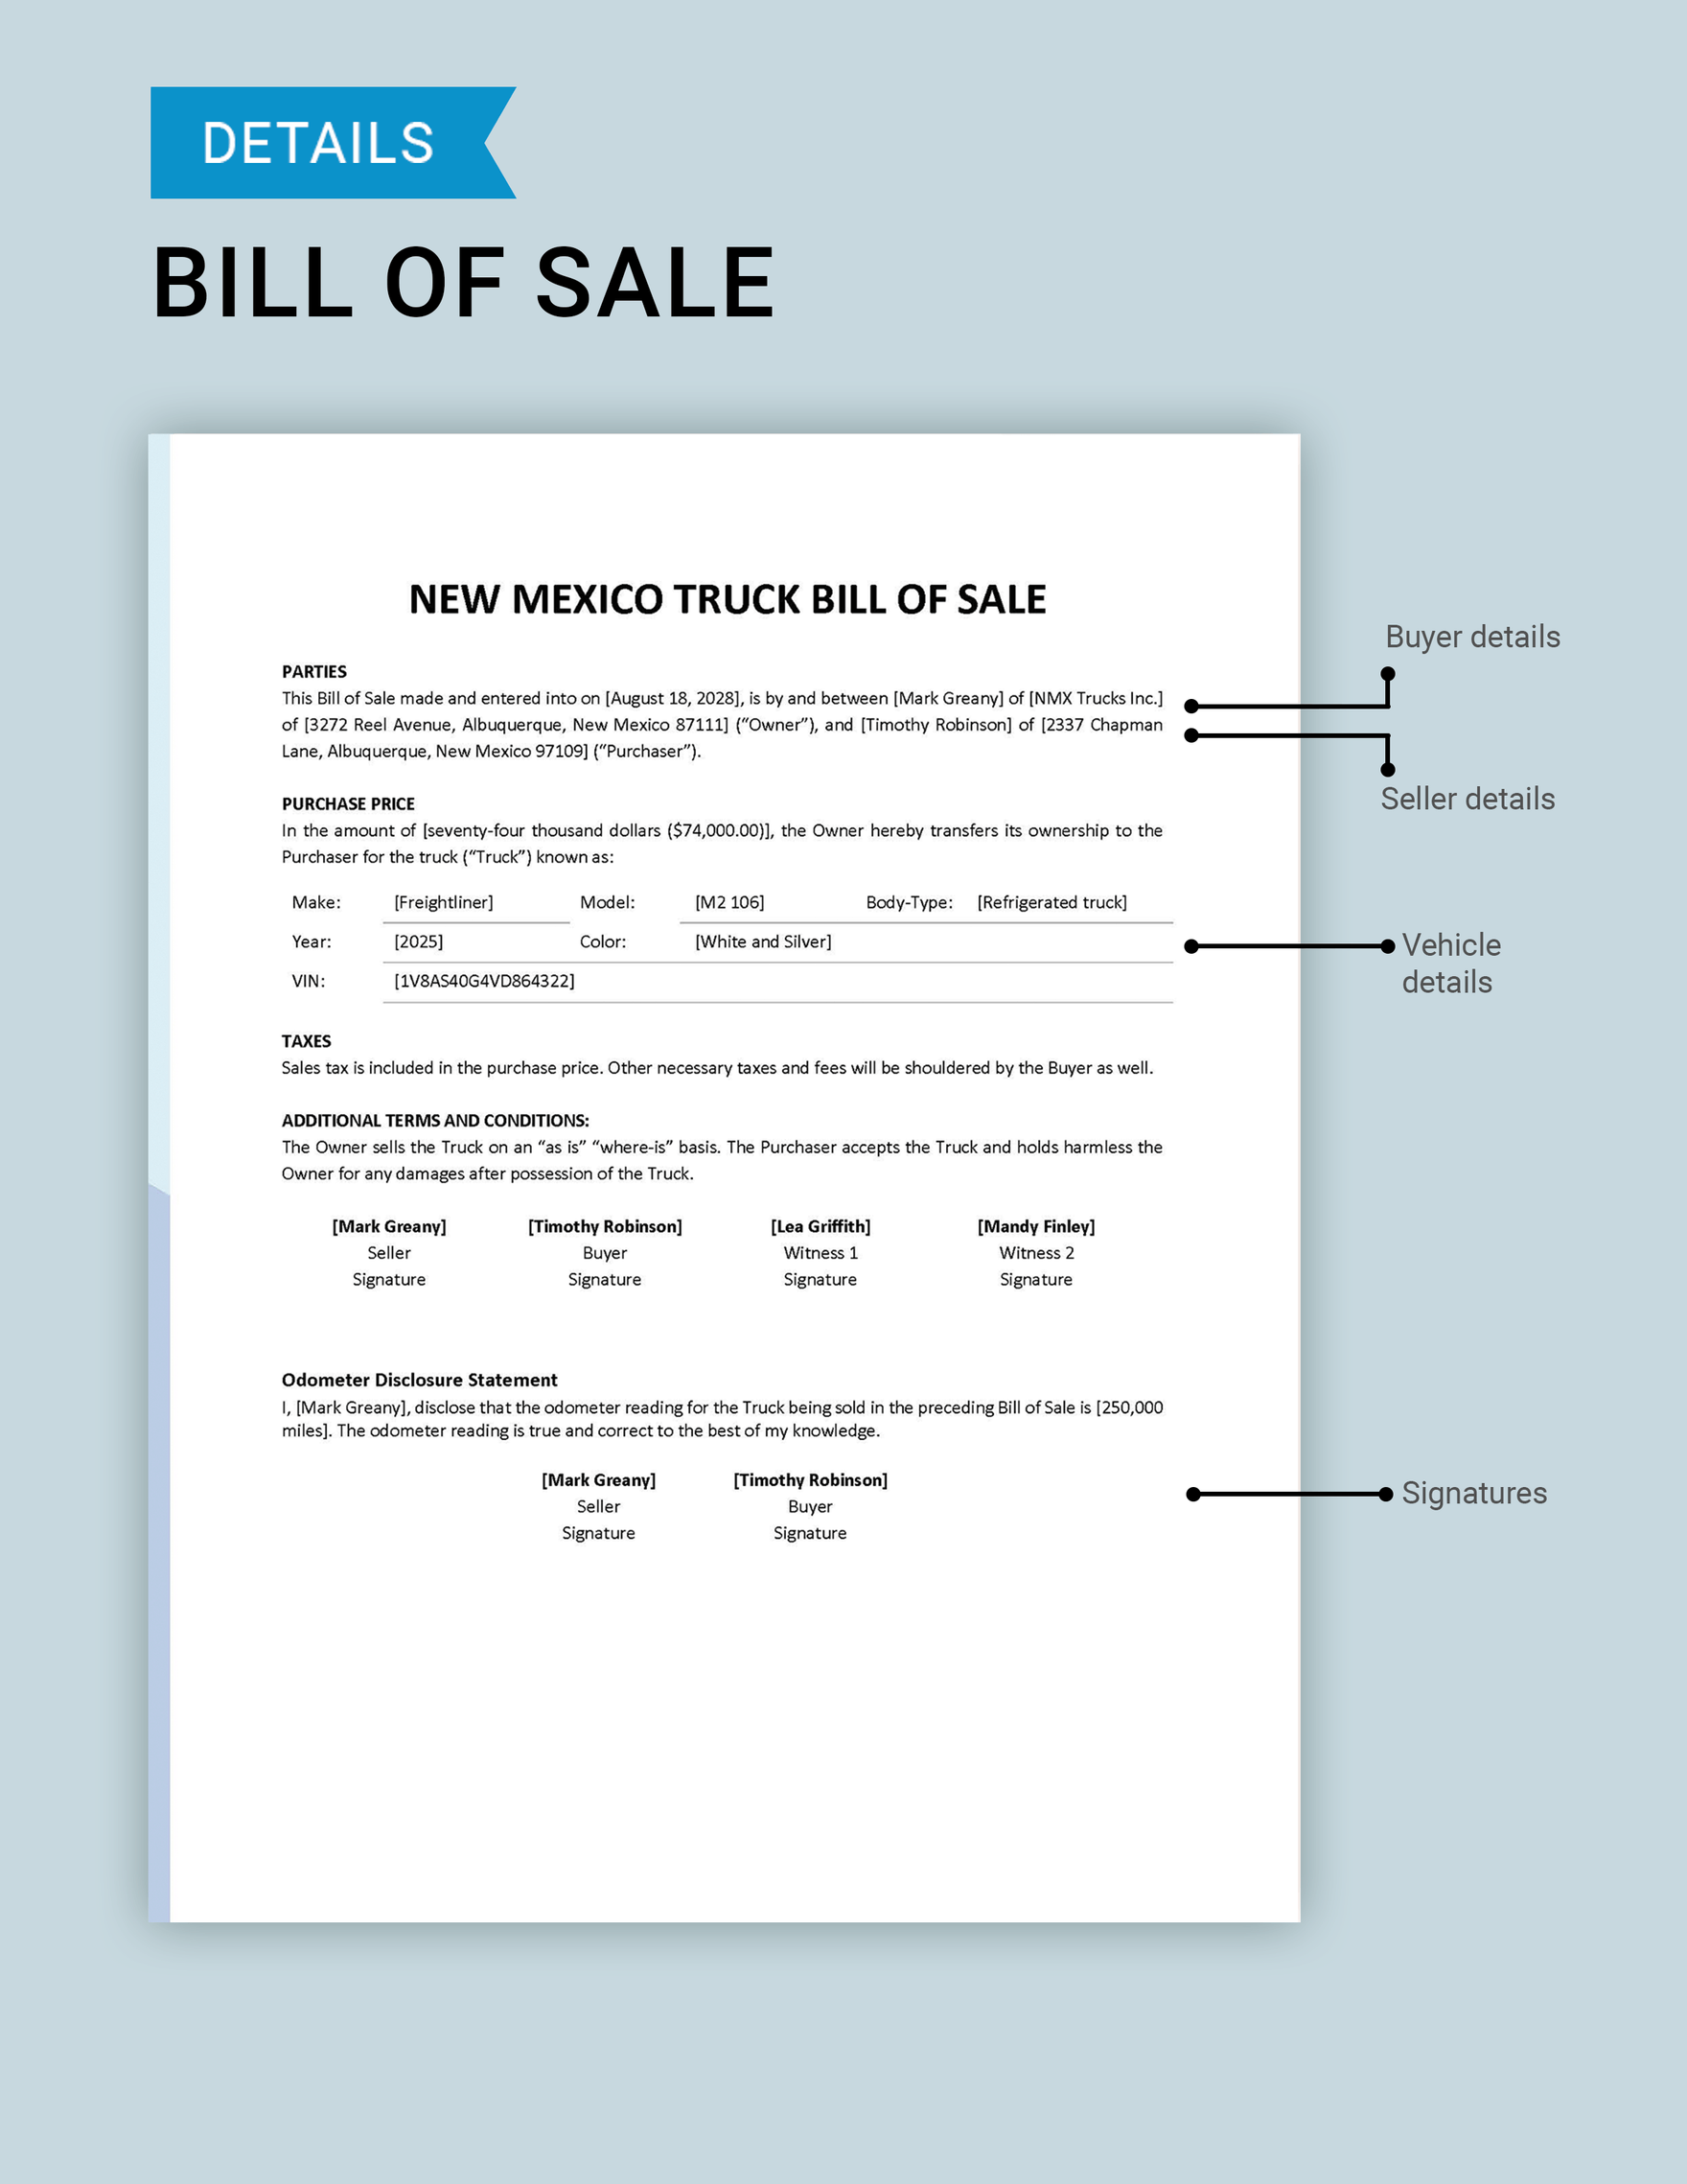 New Mexico Truck Bill of Sale Template